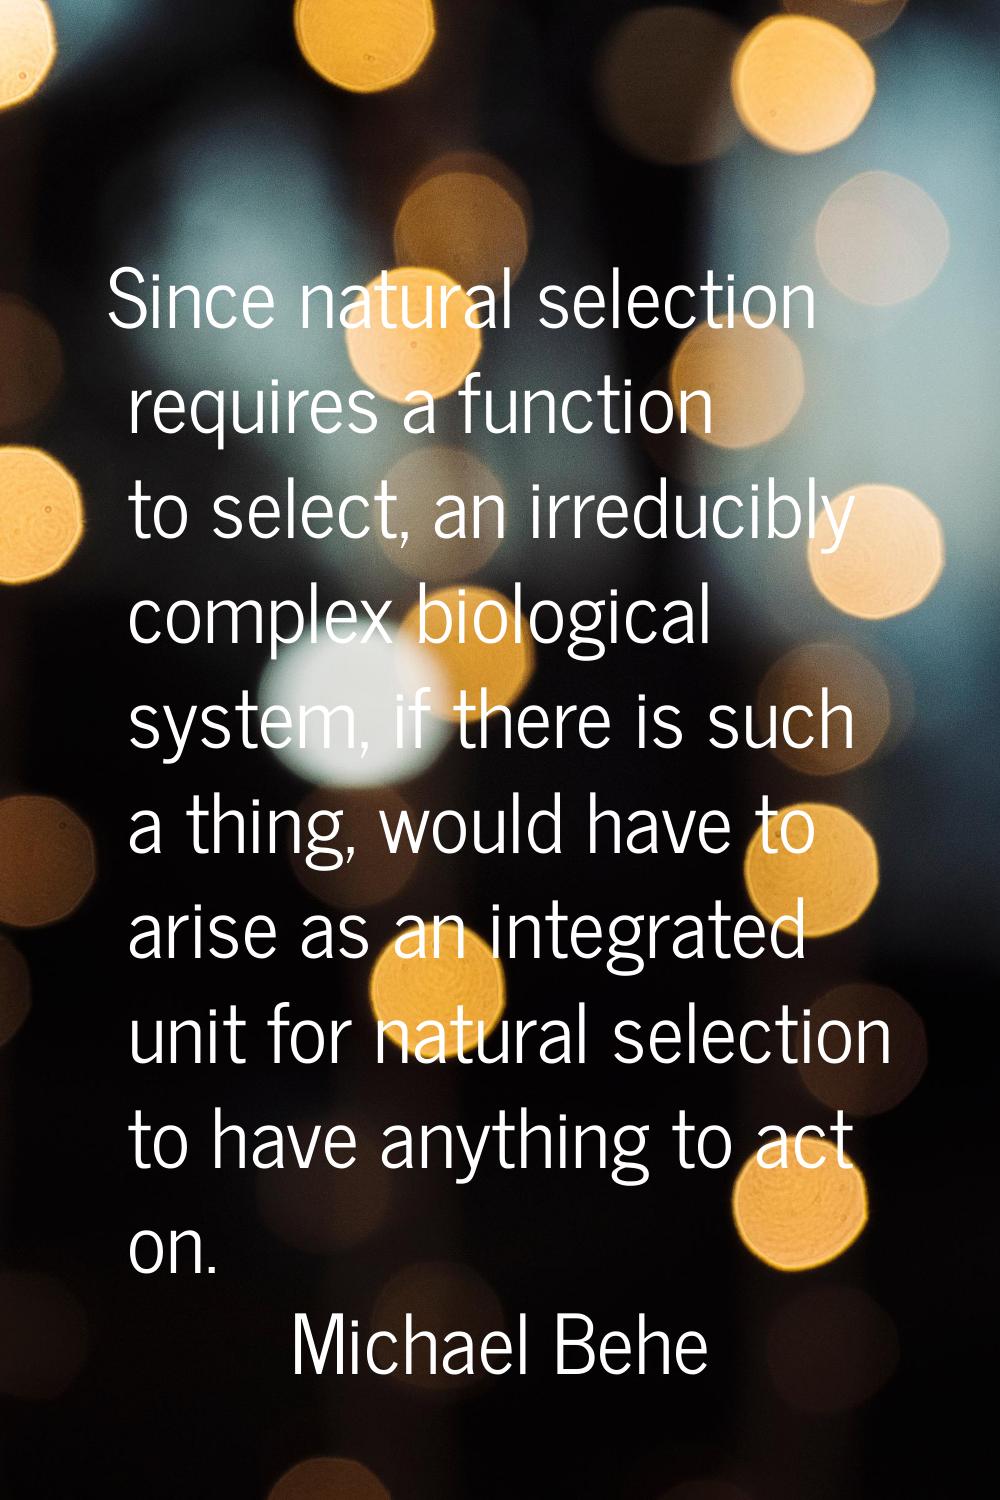 Since natural selection requires a function to select, an irreducibly complex biological system, if